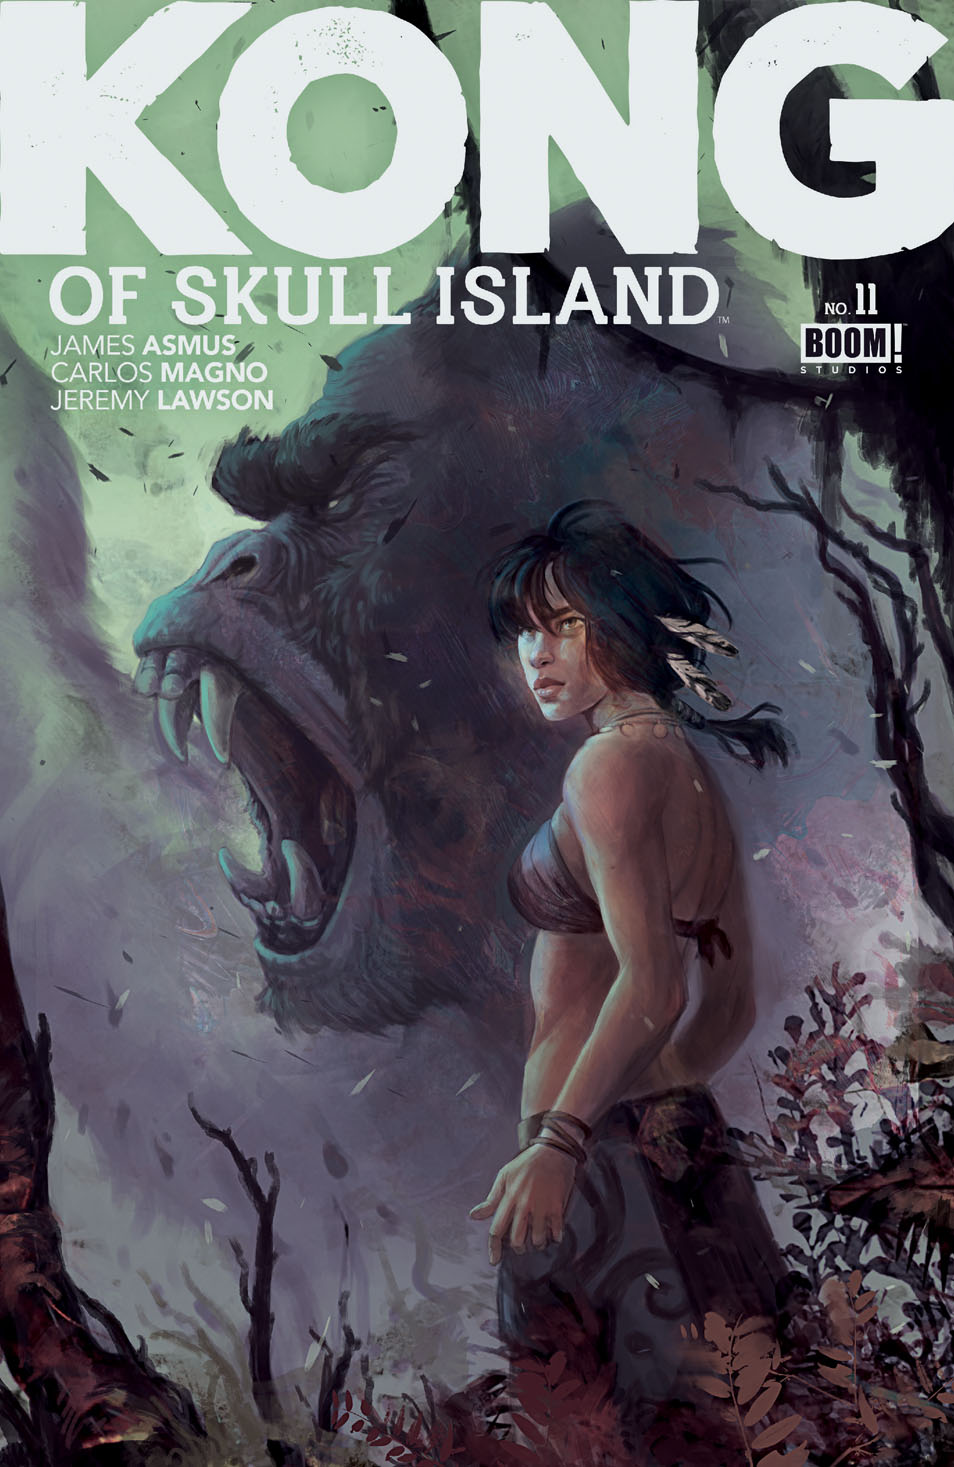 This image is the cover for the book Kong of Skull Island #11, Kong of Skull Island